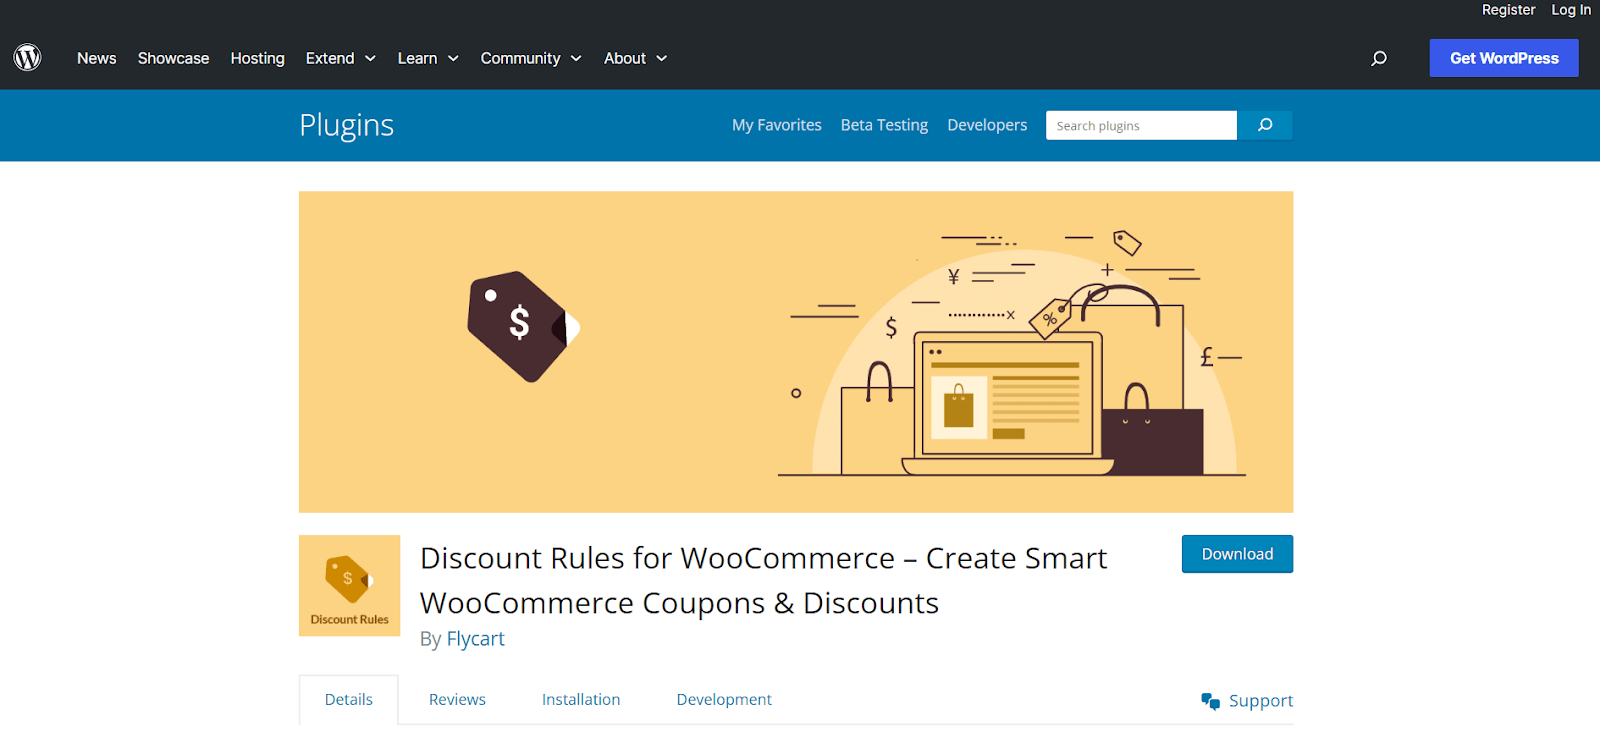 Discount Rules for WooCommerce plugin